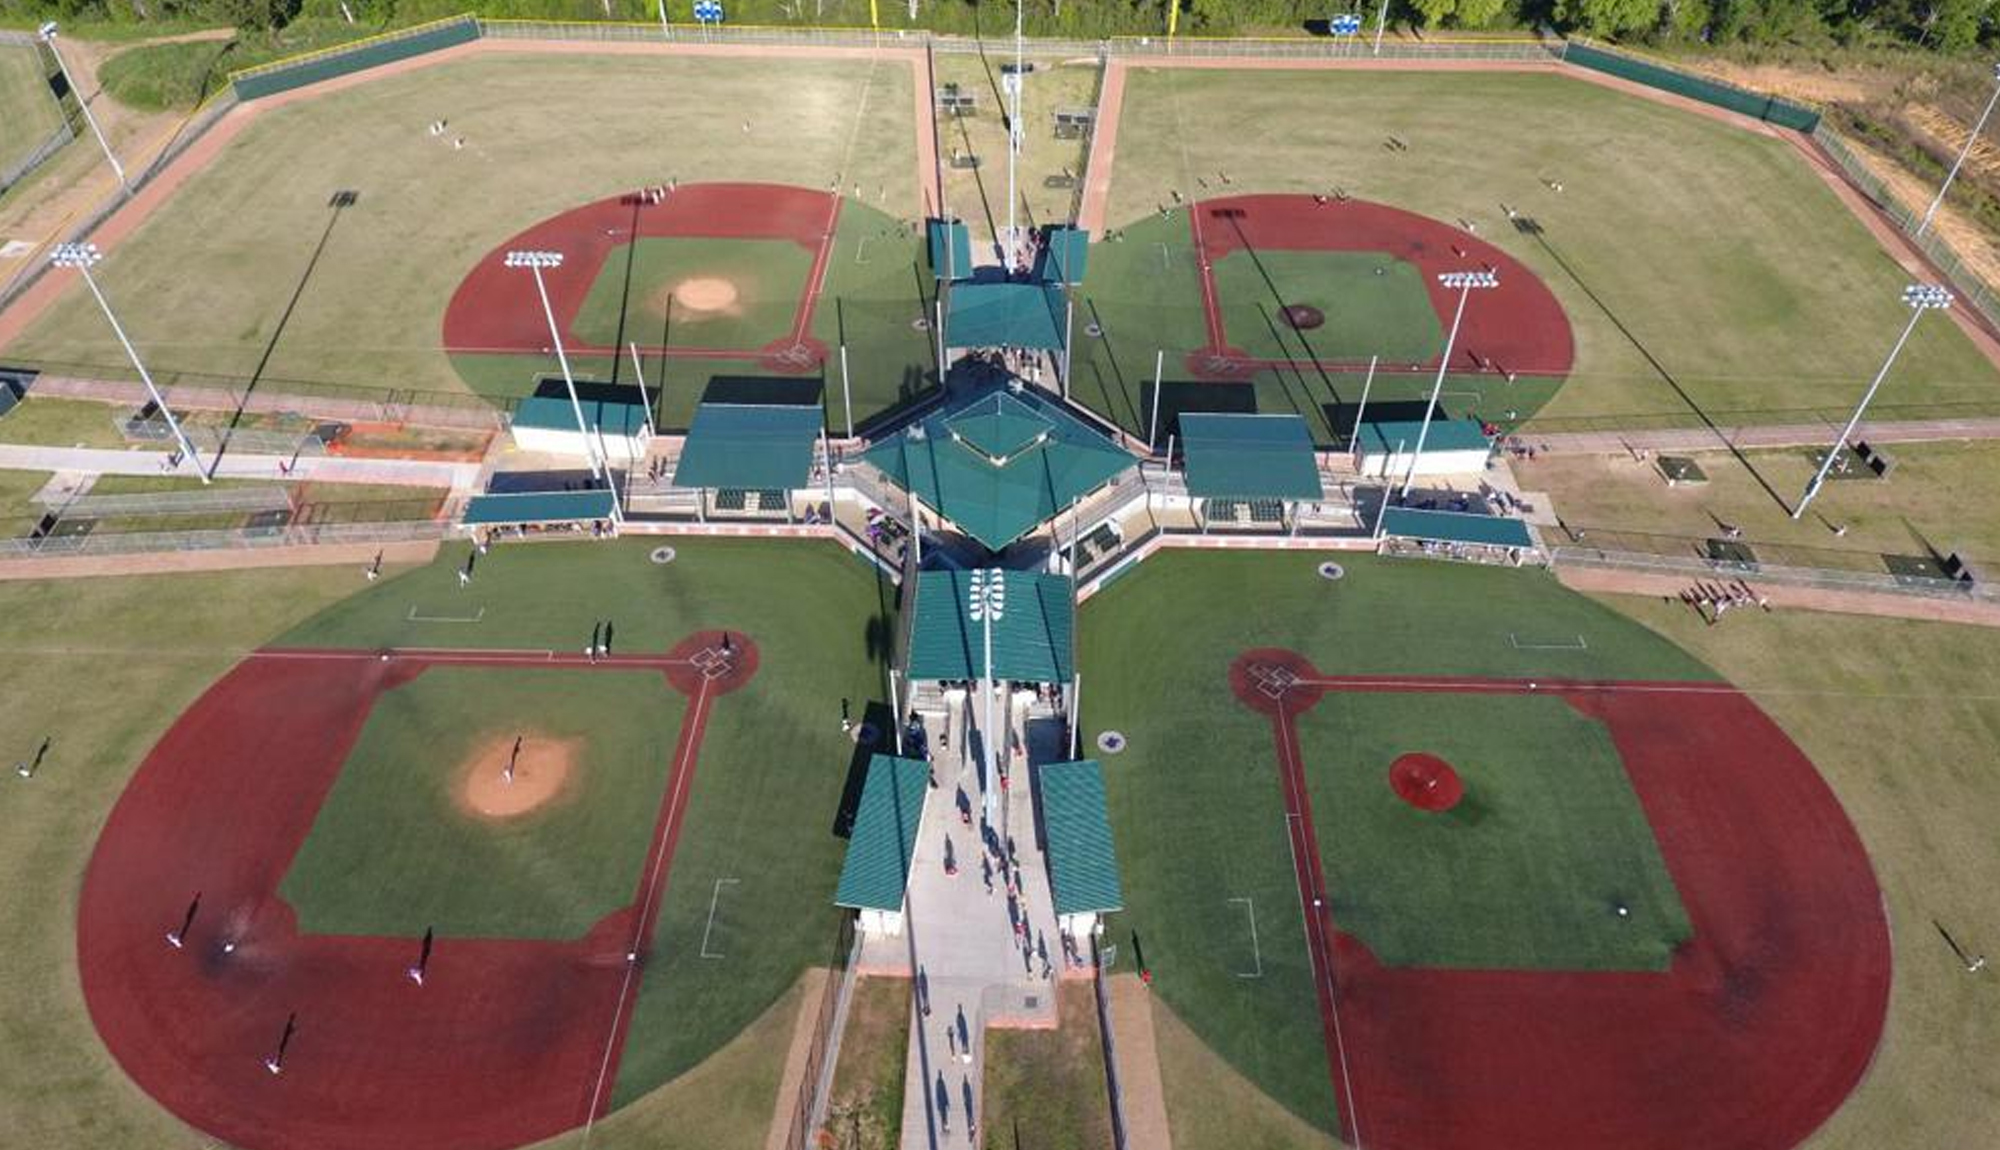 2018 National Underclass South Showcase - Event Info | Perfect Game